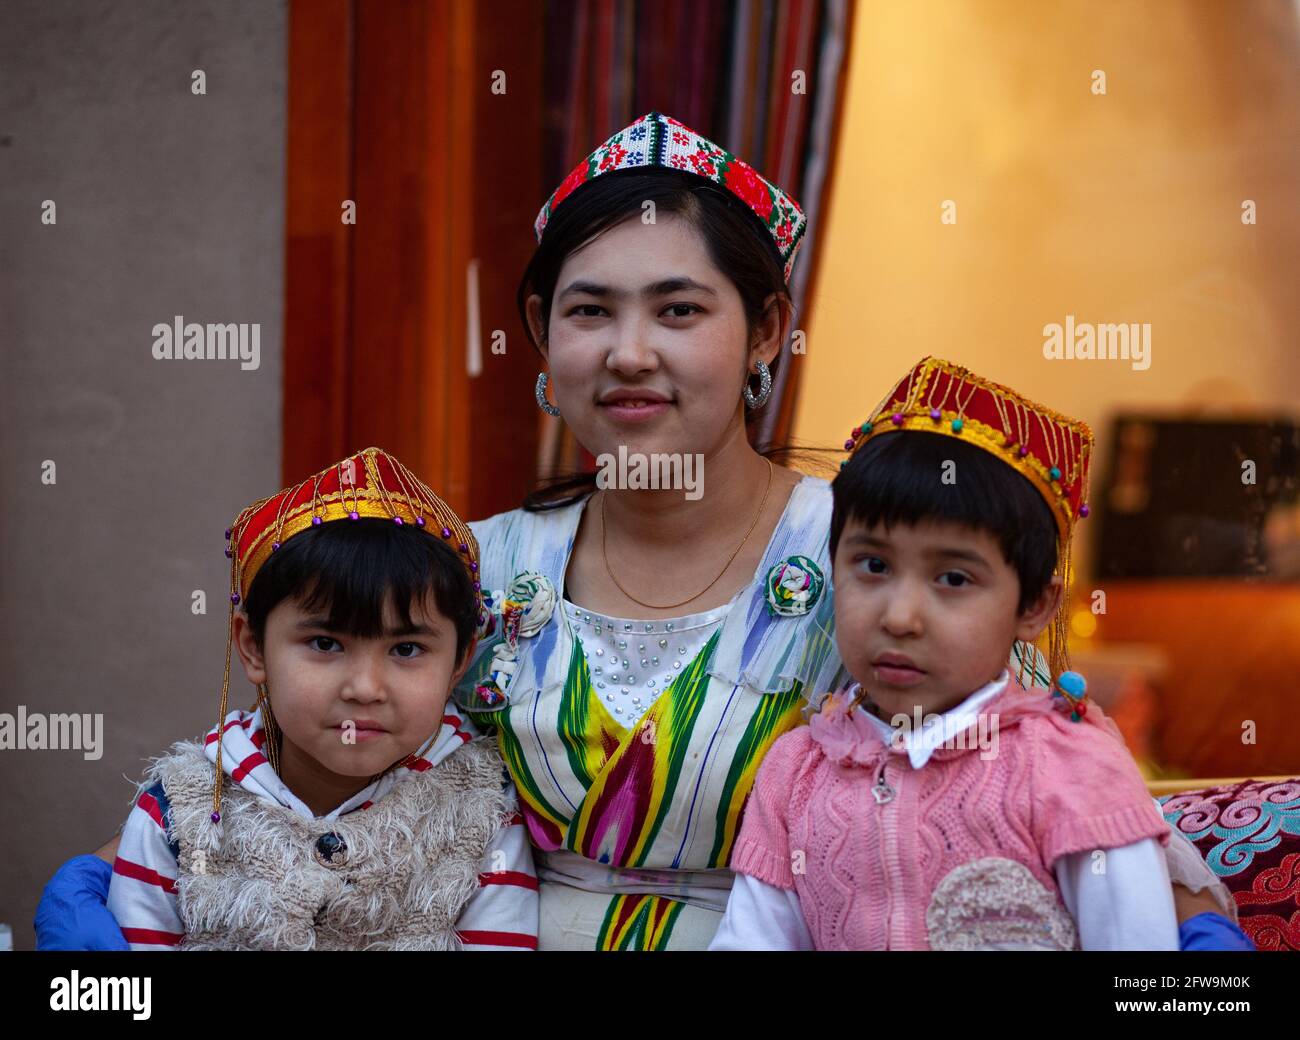 Young woman with her children Kashgar, Xinkiang, Popular Republic of China, 2019 Stock Photo